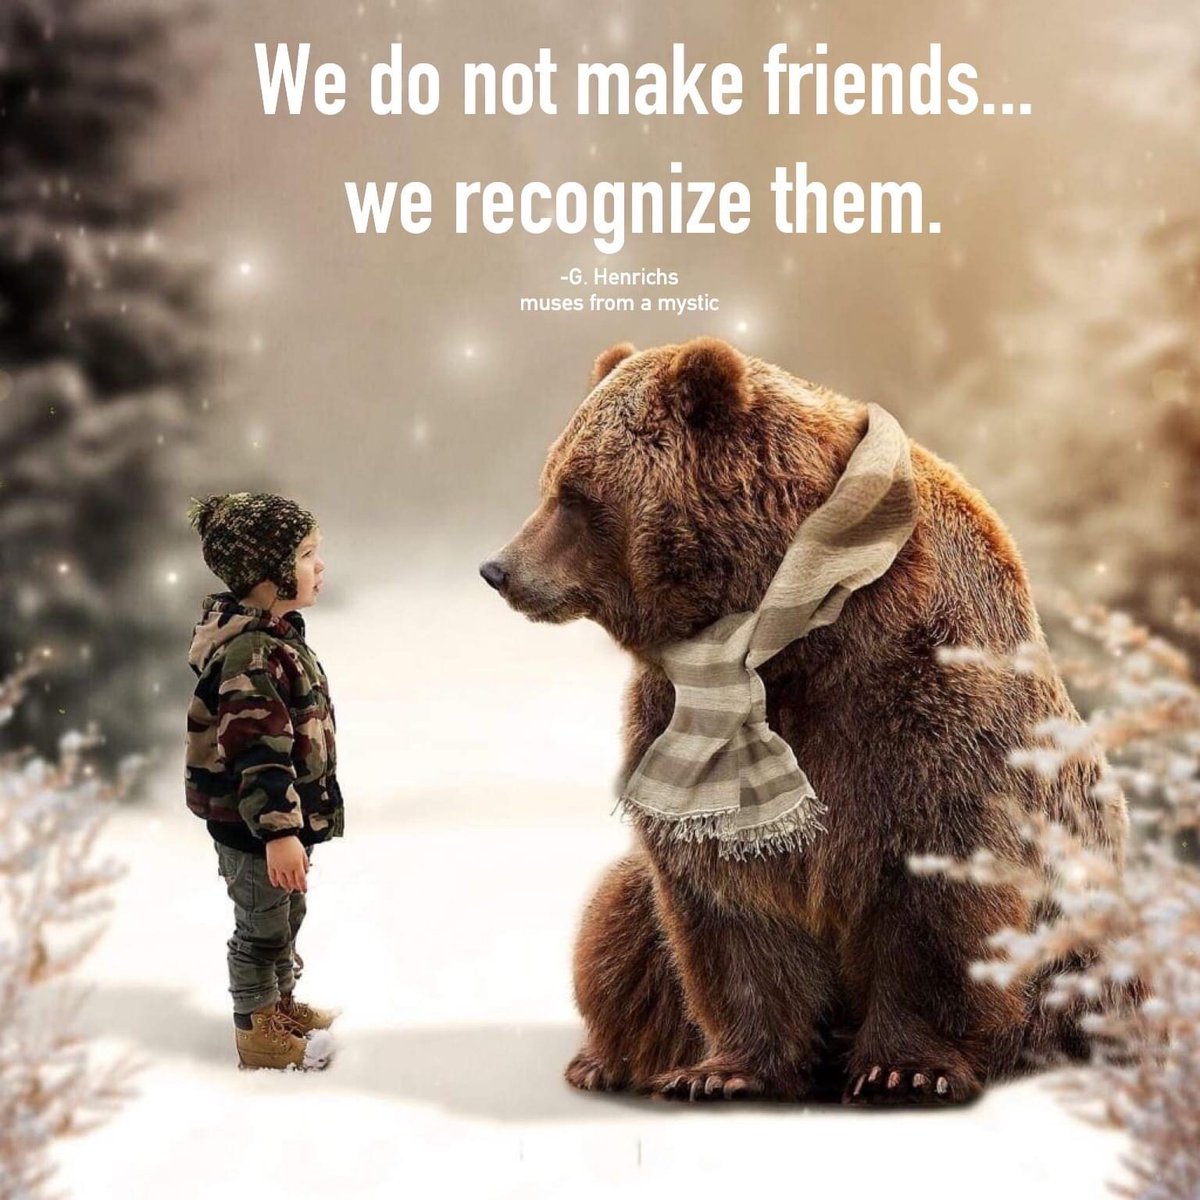 We do not make friends...we recognize them. - G. Henrichs ~ Friendship is an energy resonance…a vibe recognition of a kindred spirit. ~ #Friendship #KindredSpirits